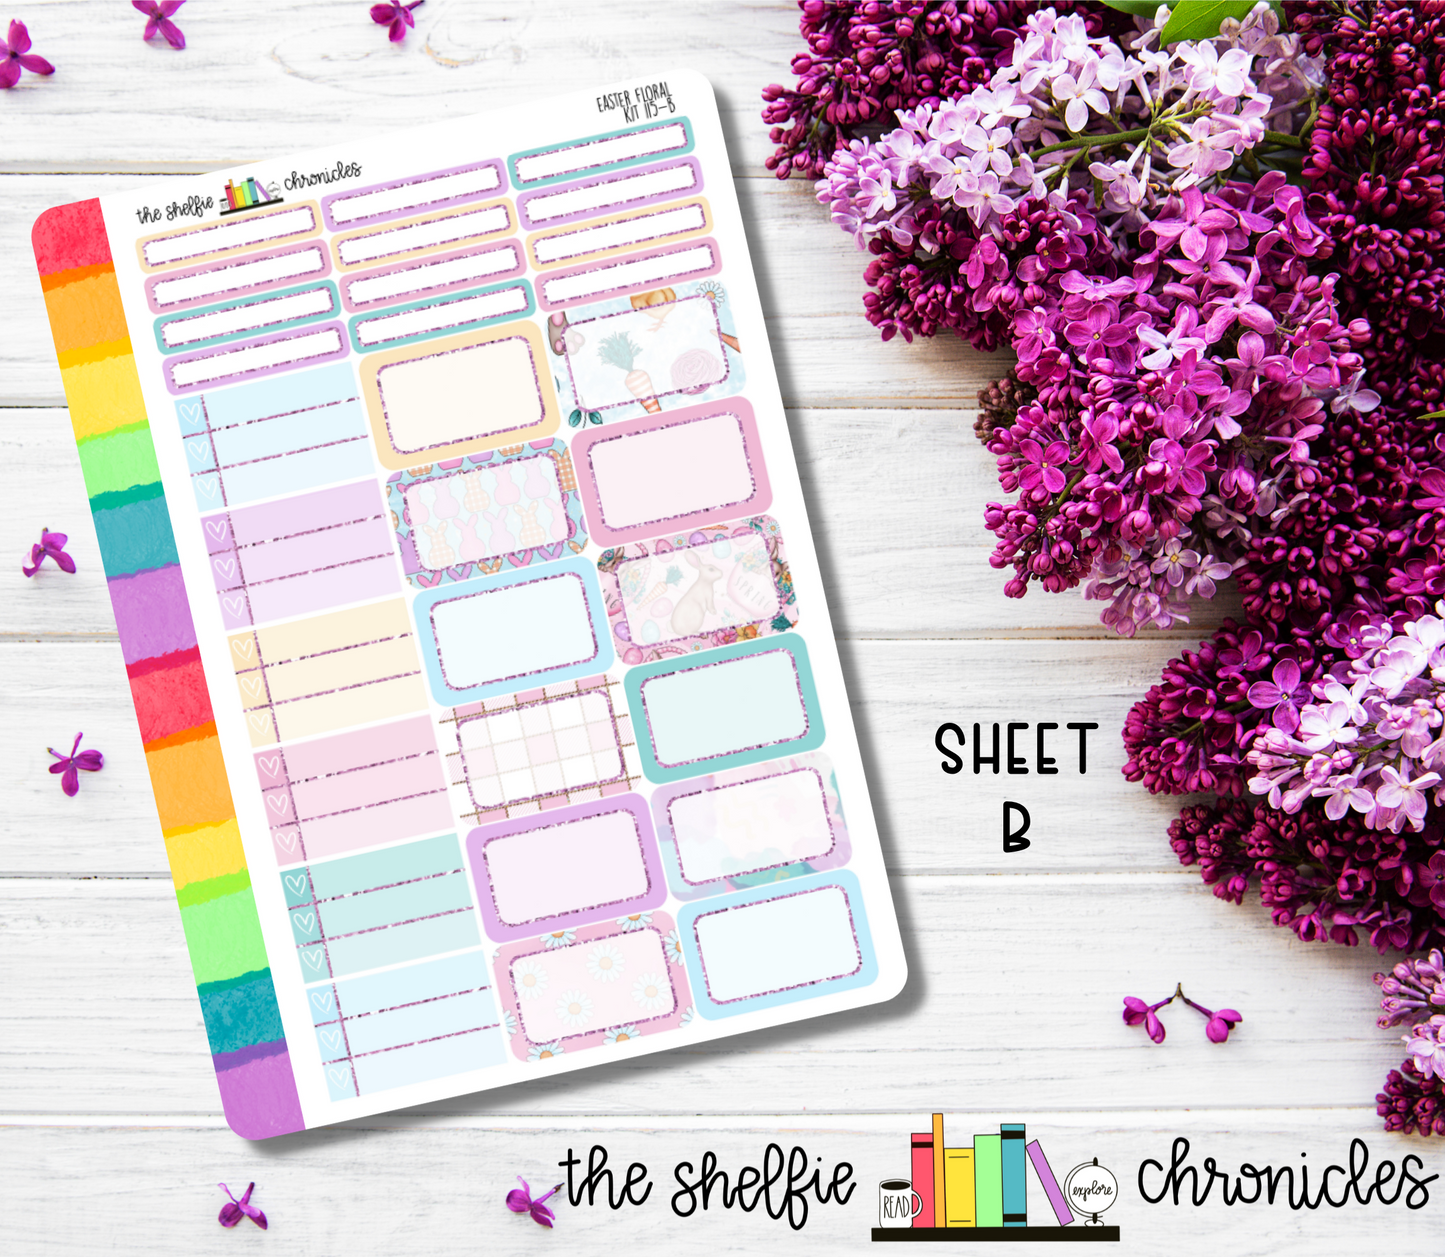 Kit 115 - Easter Floral Weekly Kit - Die Cut Stickers - Repositionable Paper - Made To Fit 7x9 Planners